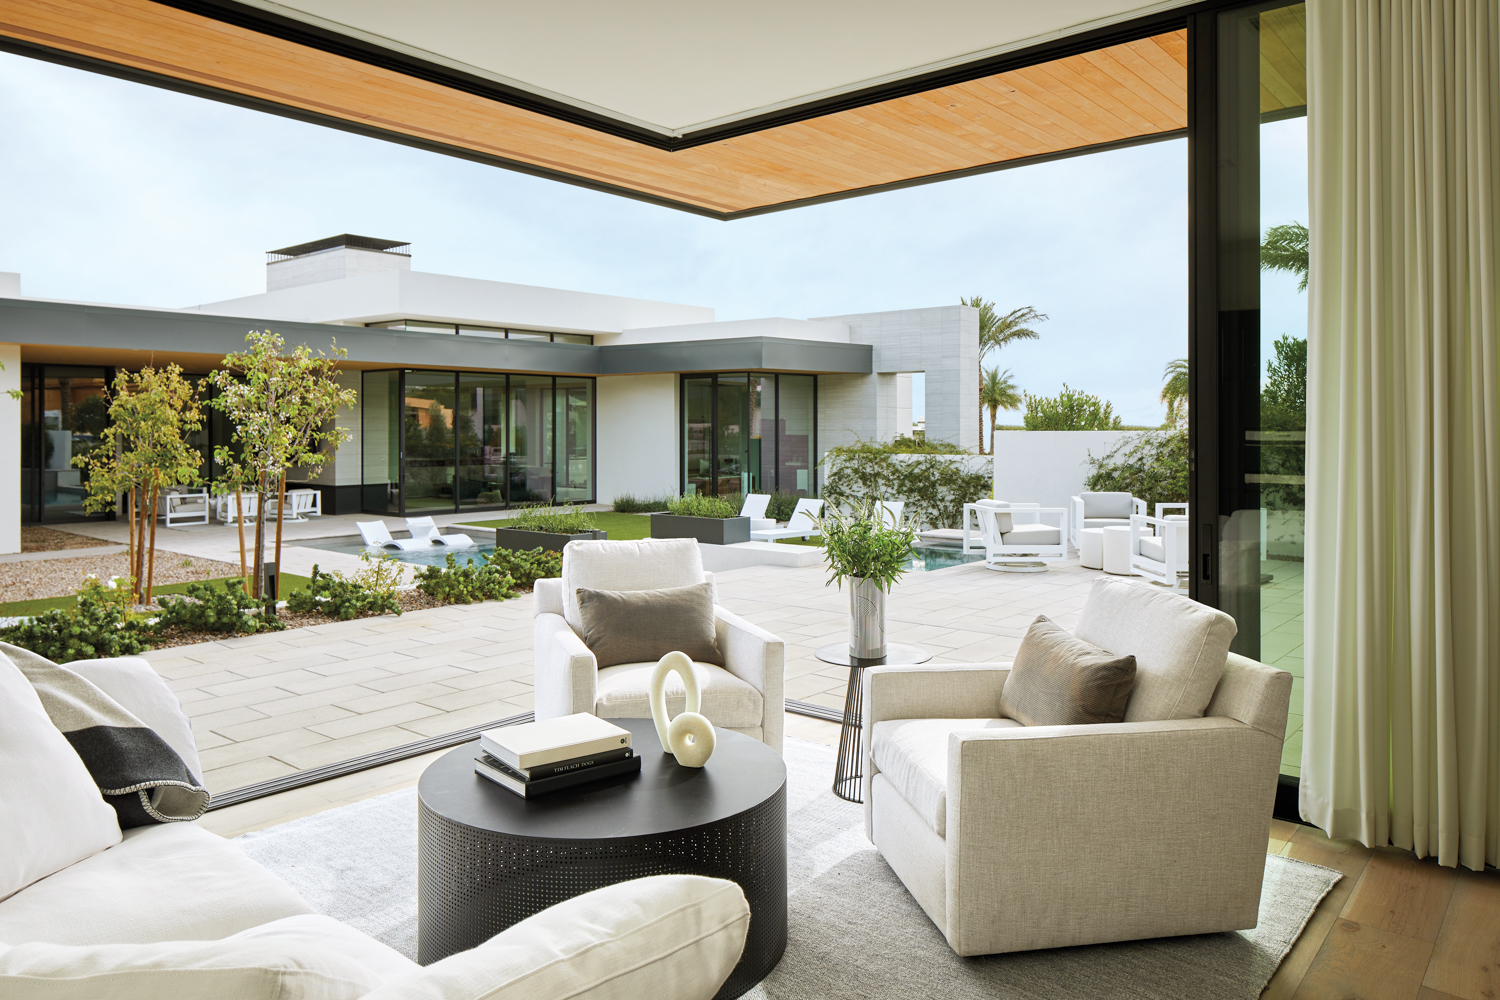 Living room with white chairs, a black coffee table and walls that open to an outdoor patio